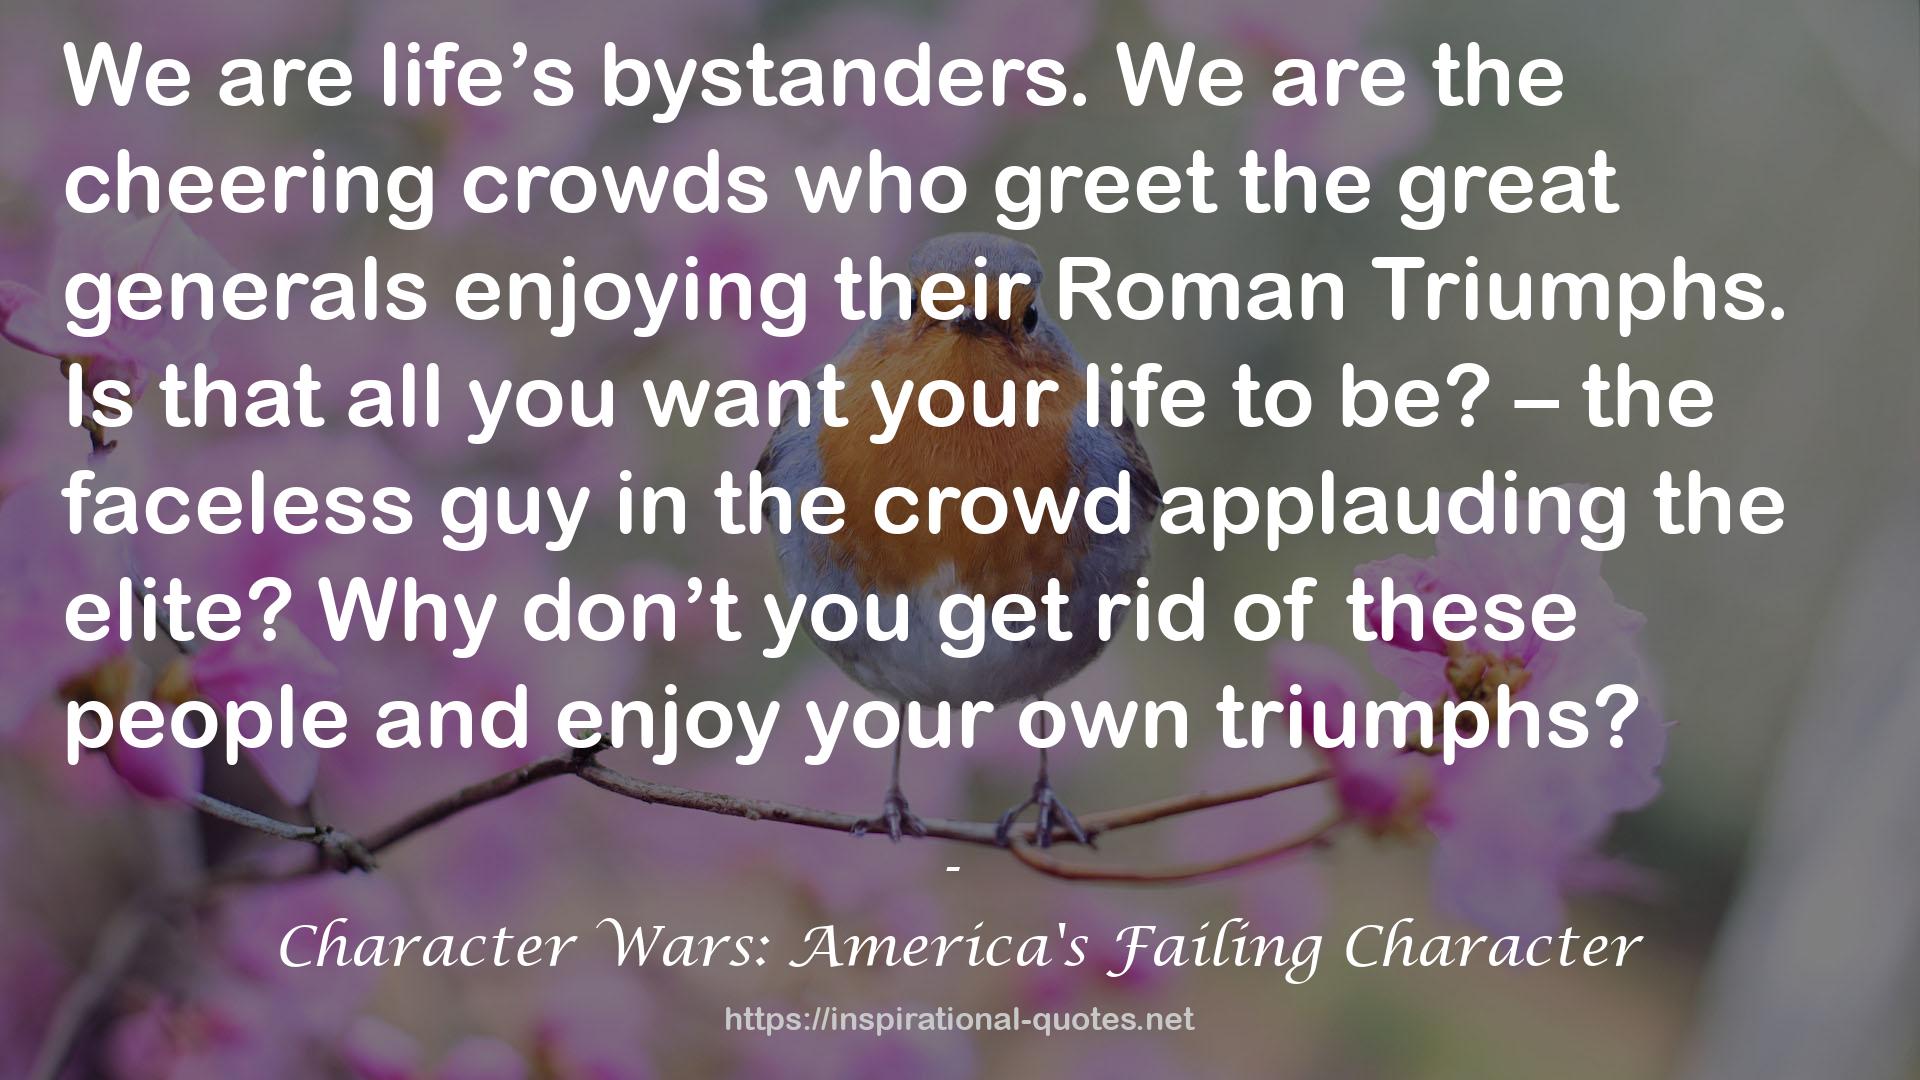 Character Wars: America's Failing Character QUOTES